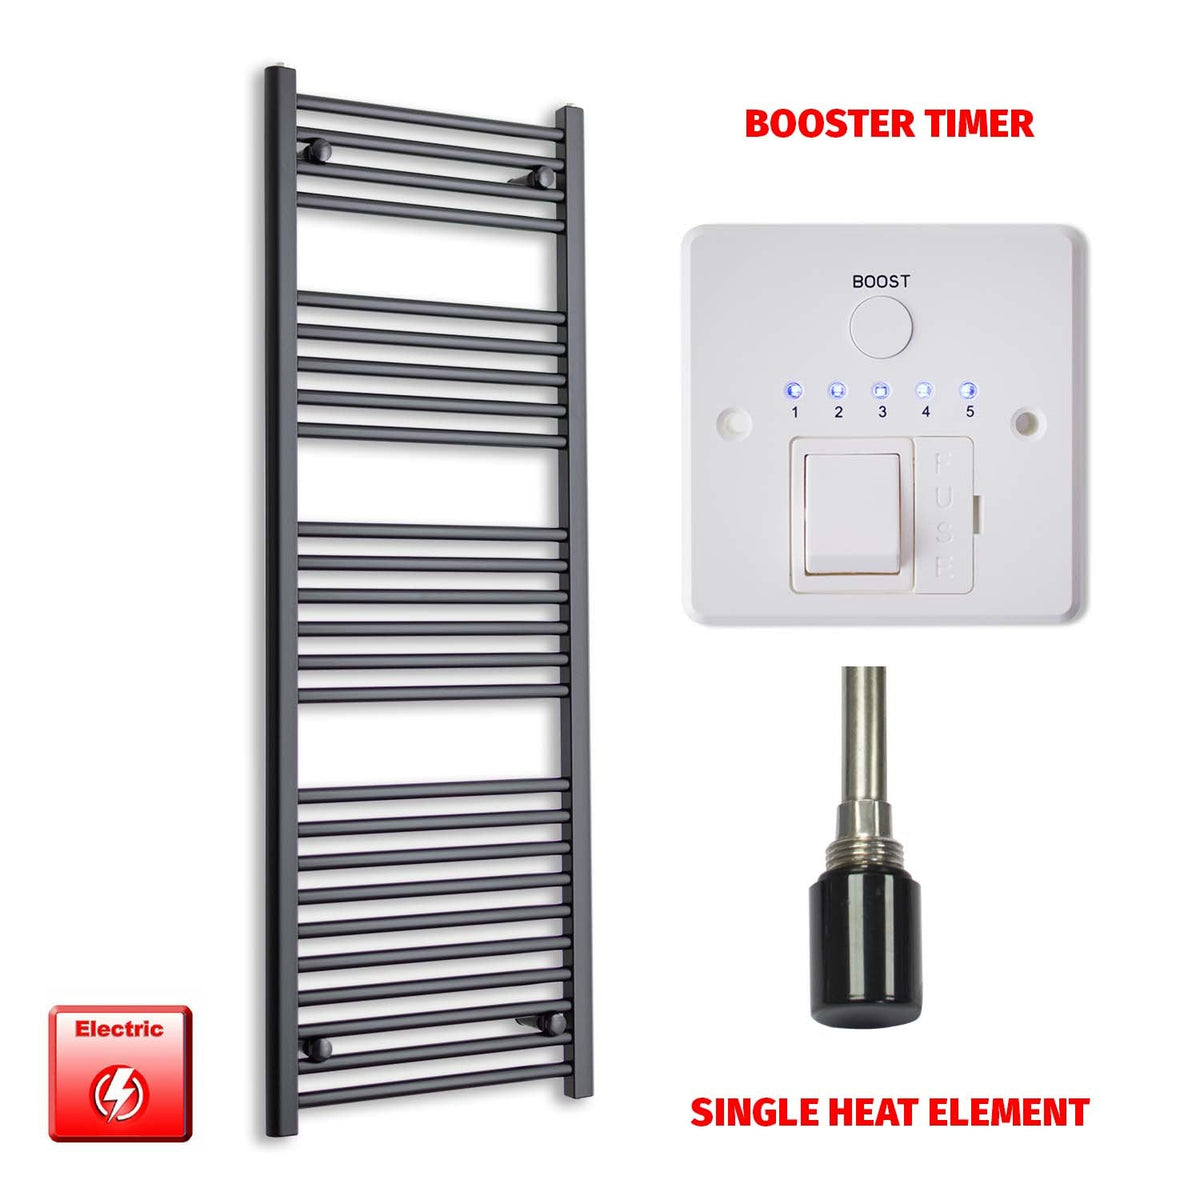 1400mm High 600mm Wide Flat Black Pre-Filled Electric Heated Towel Rail Radiator HTR Single Booster Timer